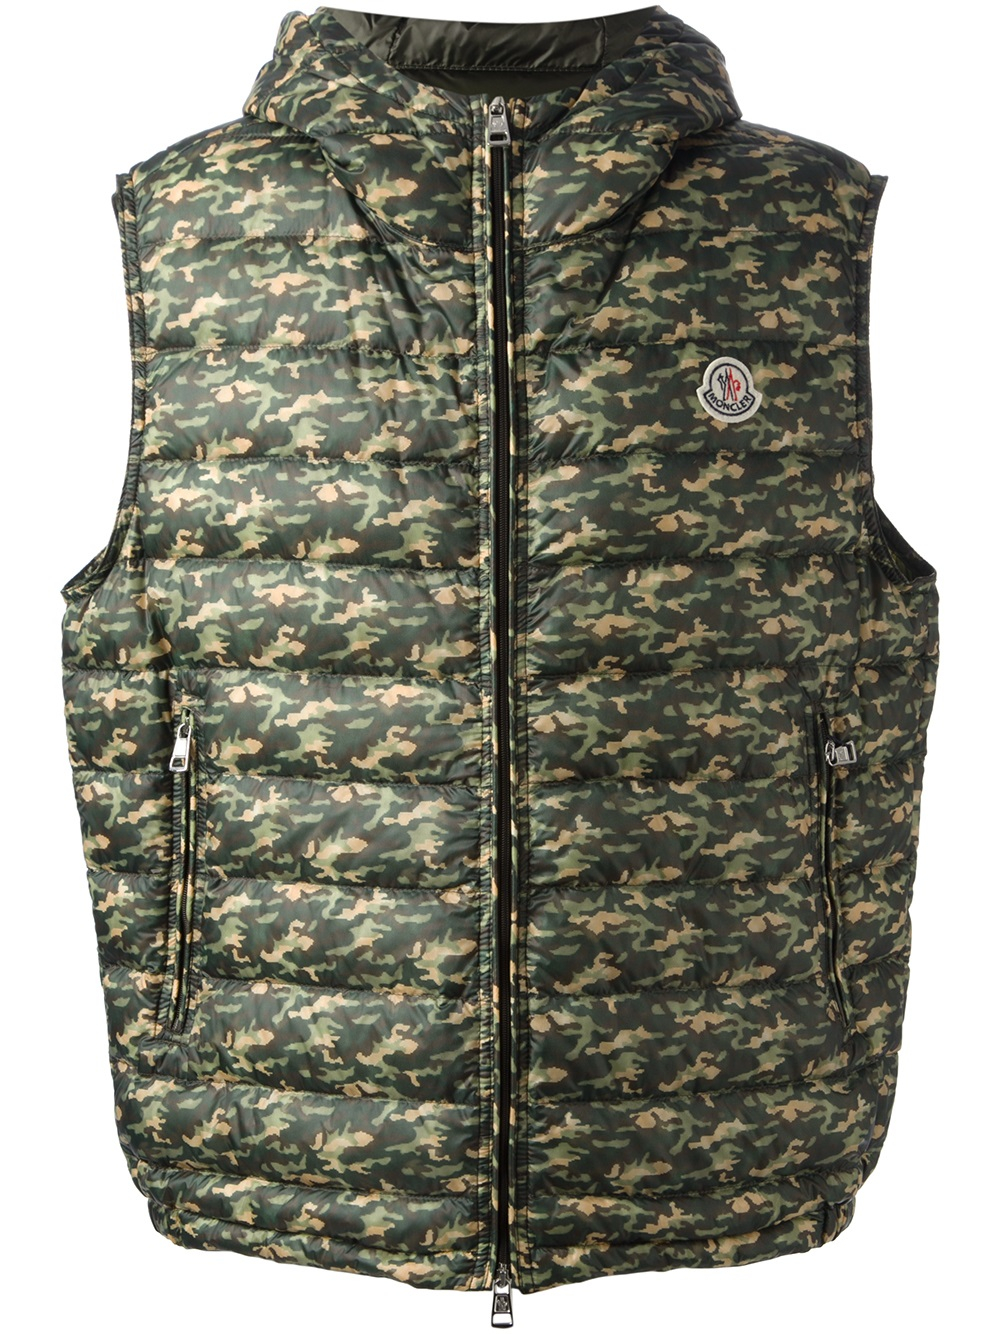 Lyst - Moncler Camouflage Print Gilet in Green for Men